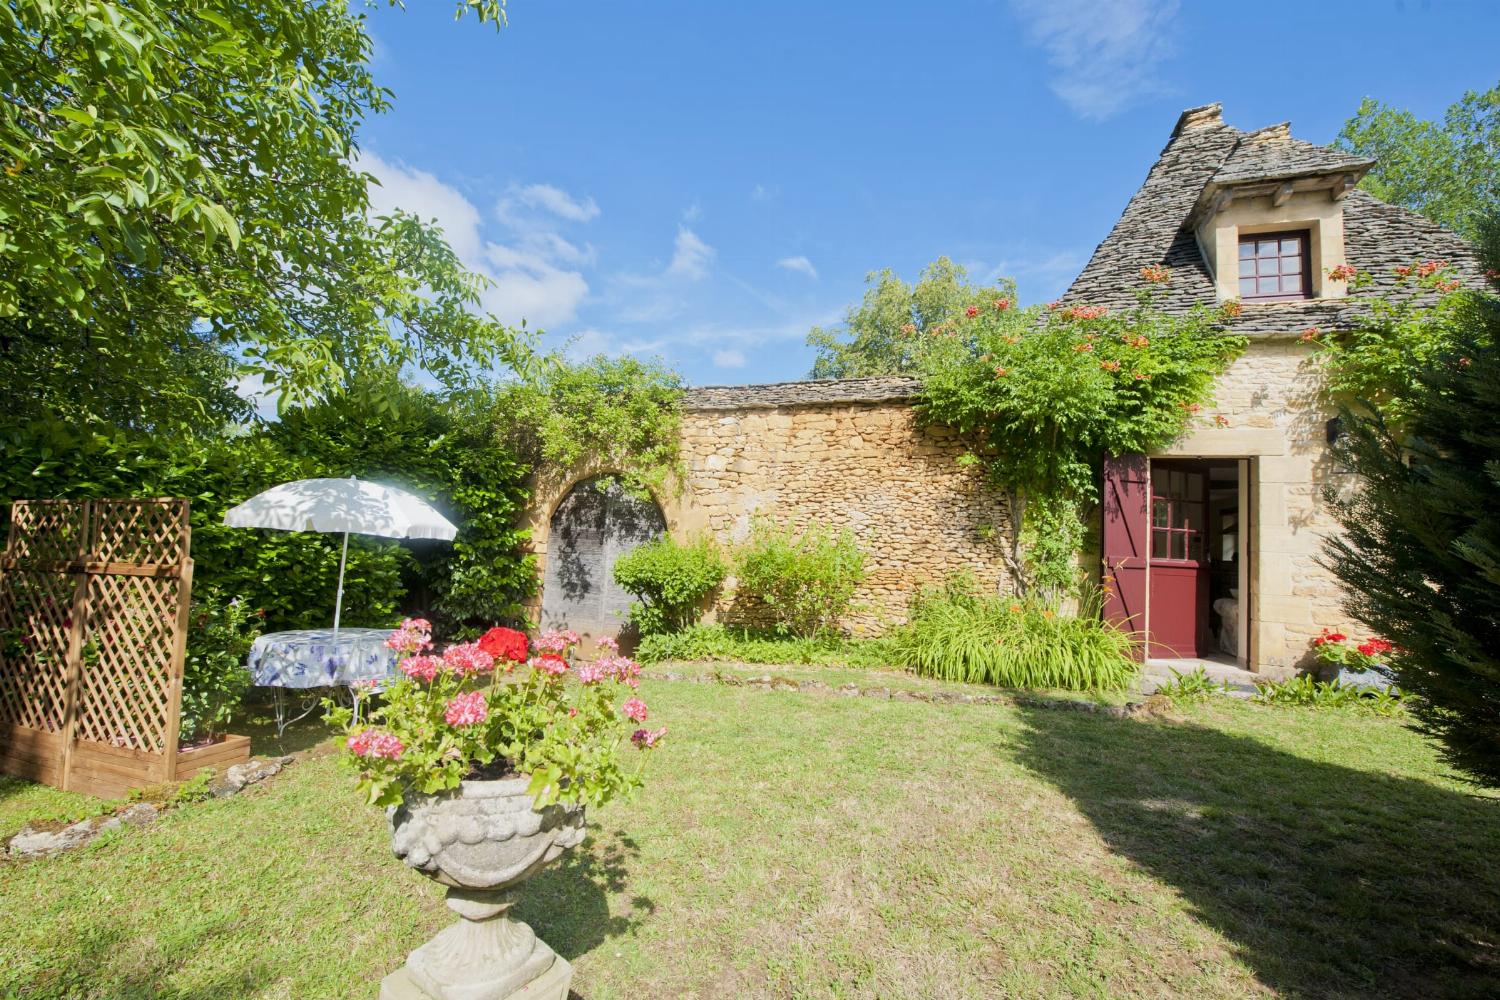 Rental cottage in Nouvelle-Aquitaine